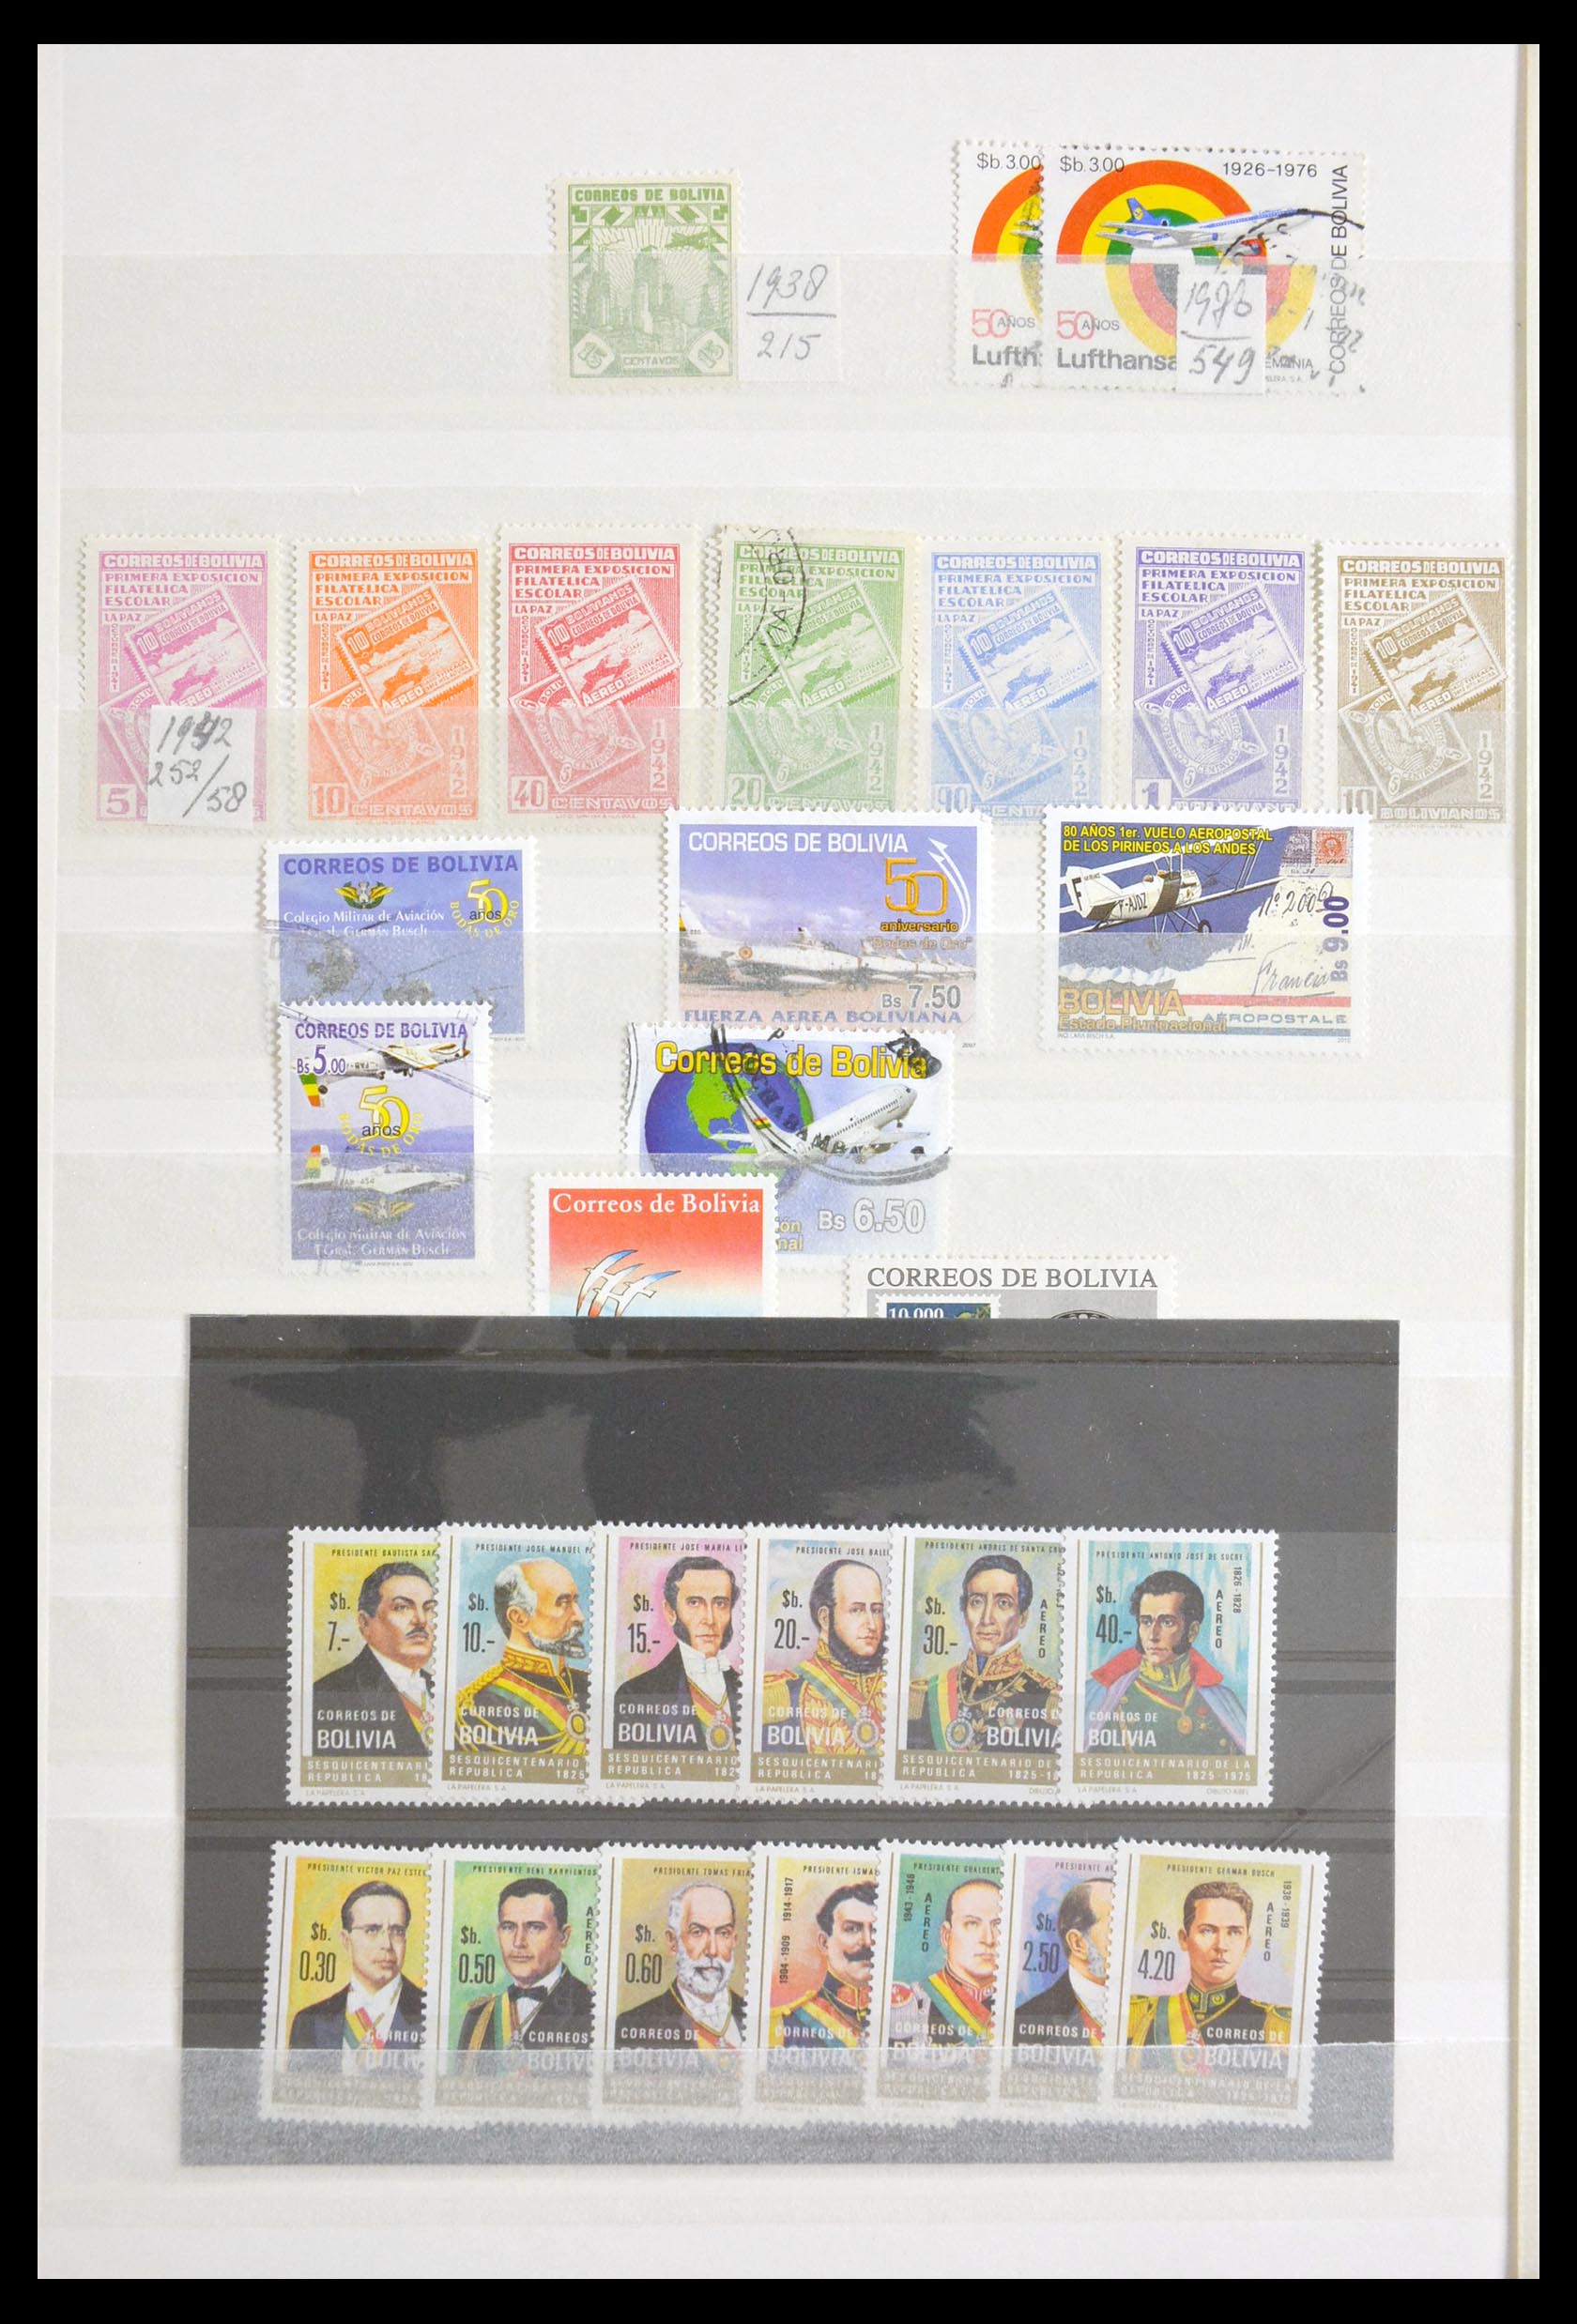 29917 024 - 29917 Latin America airmail stamps.